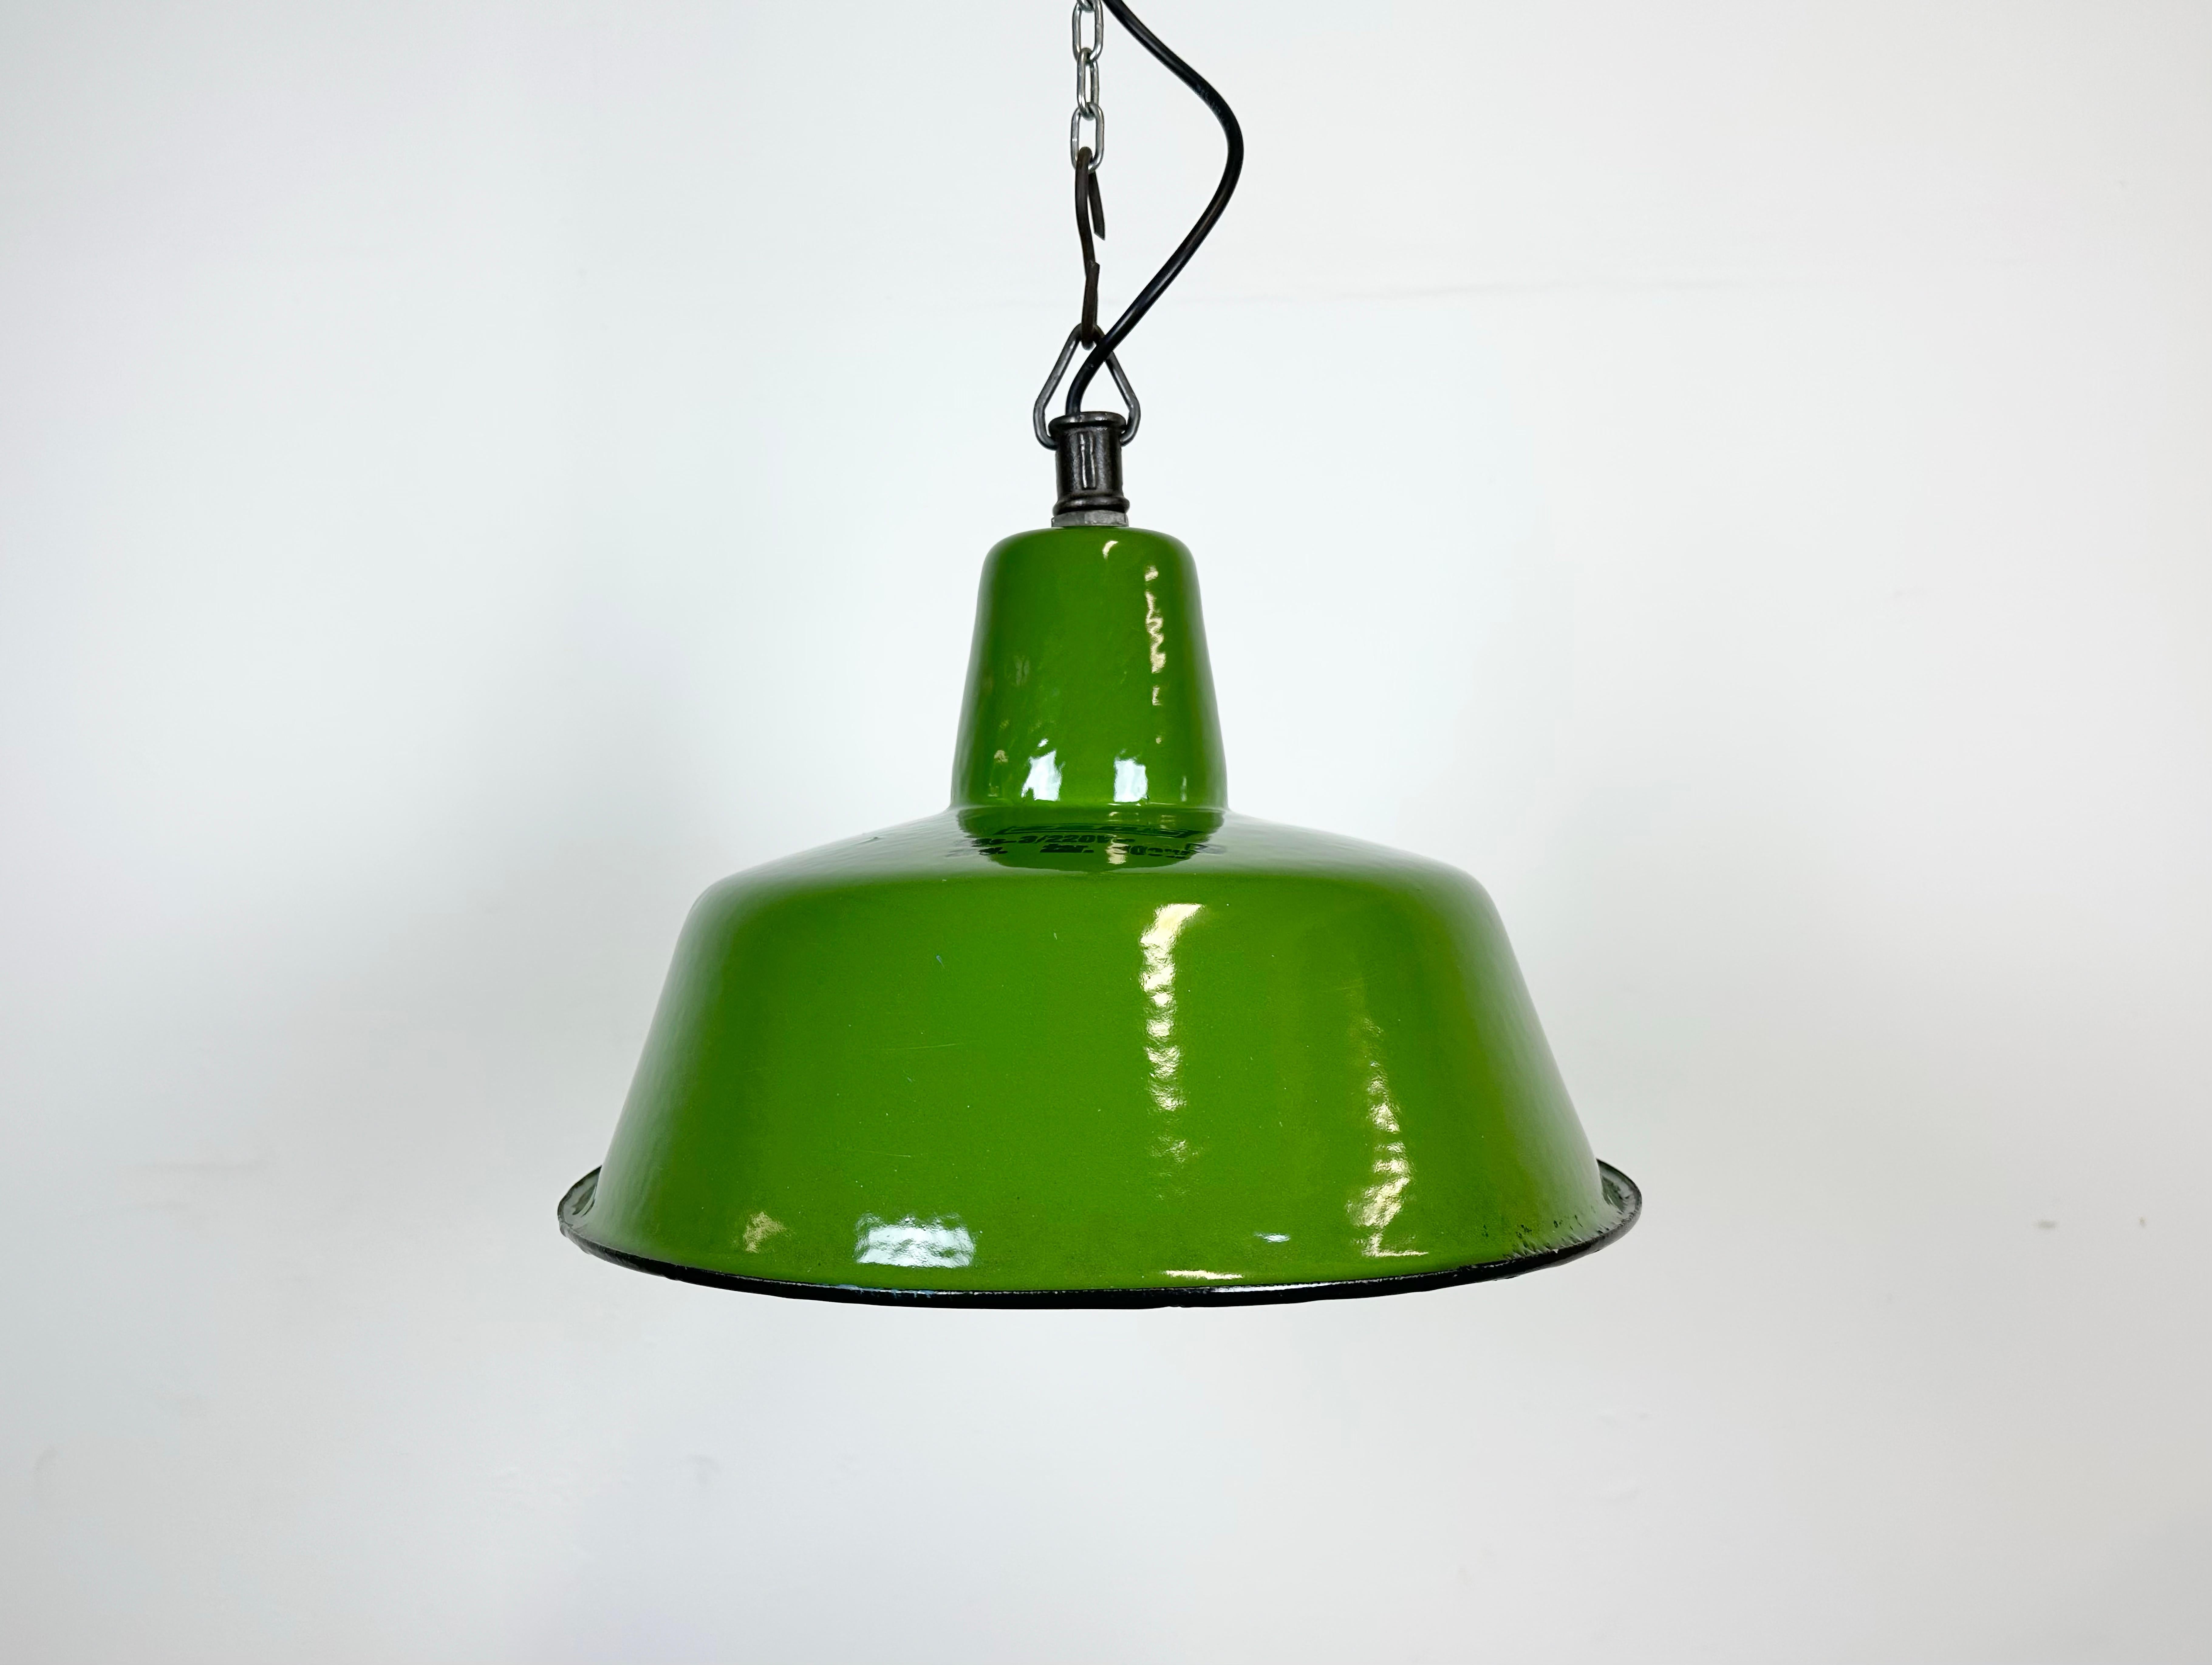 Industrial green enamel pendant light made by Zaos in Poland during the 1960s. White enamel inside the shade. Cast iron top. The porcelain socket requires E 27/ E 26 light bulbs. New wire. Fully functional. The weight of the lamp is 1,5 kg.